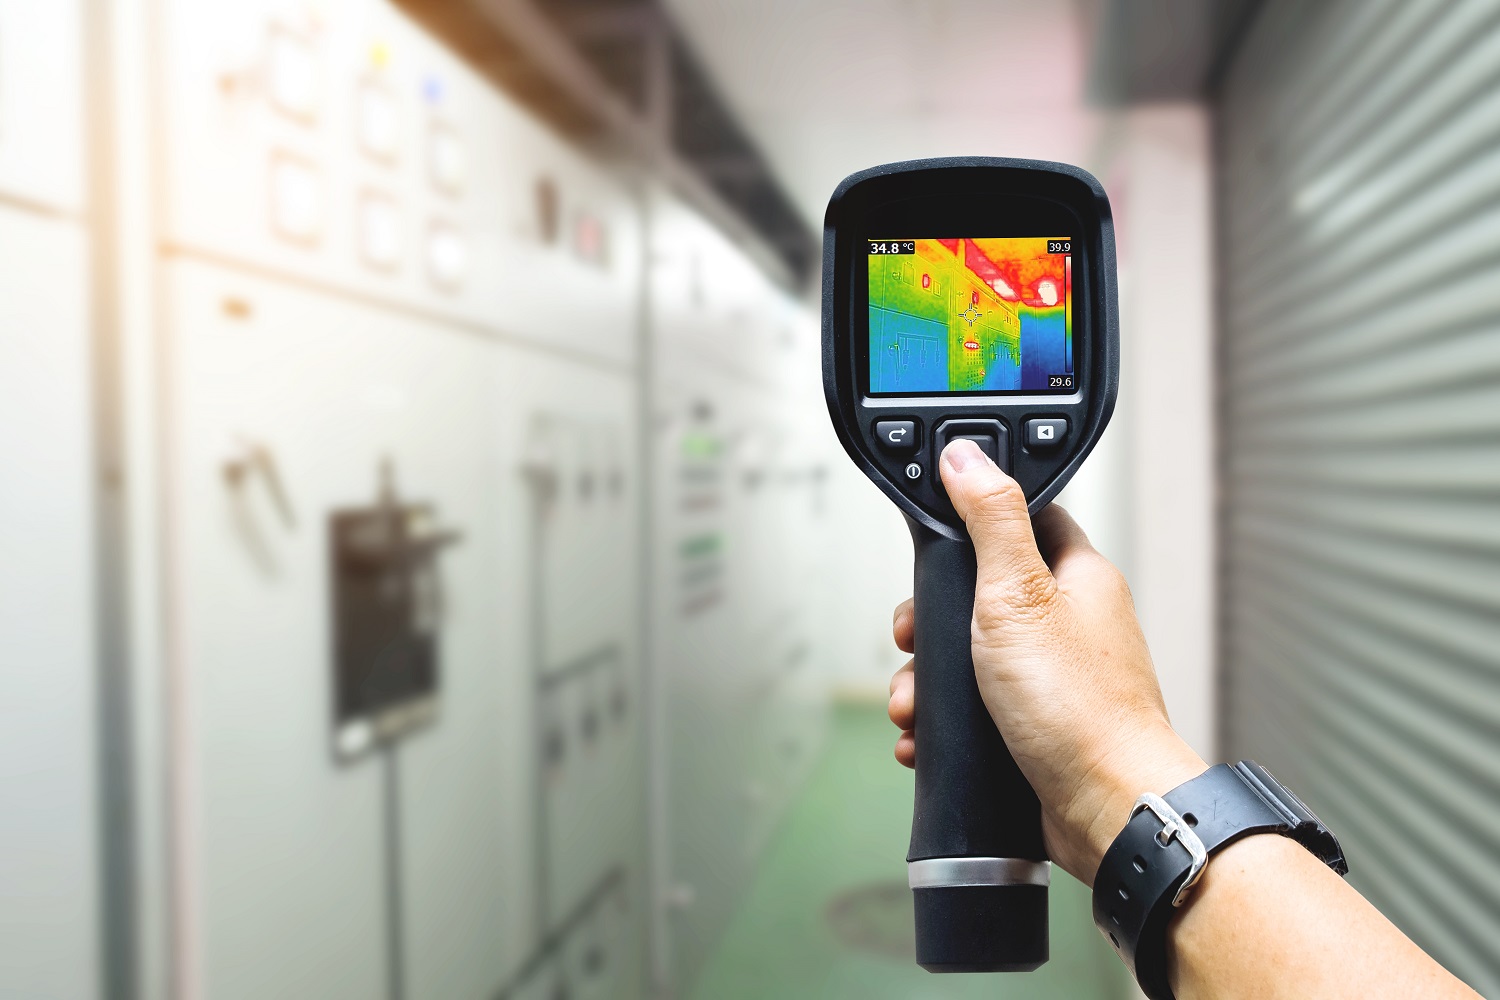 Technician use thermal imaging camera to check temperature in factory. Endnote on thermal cameras